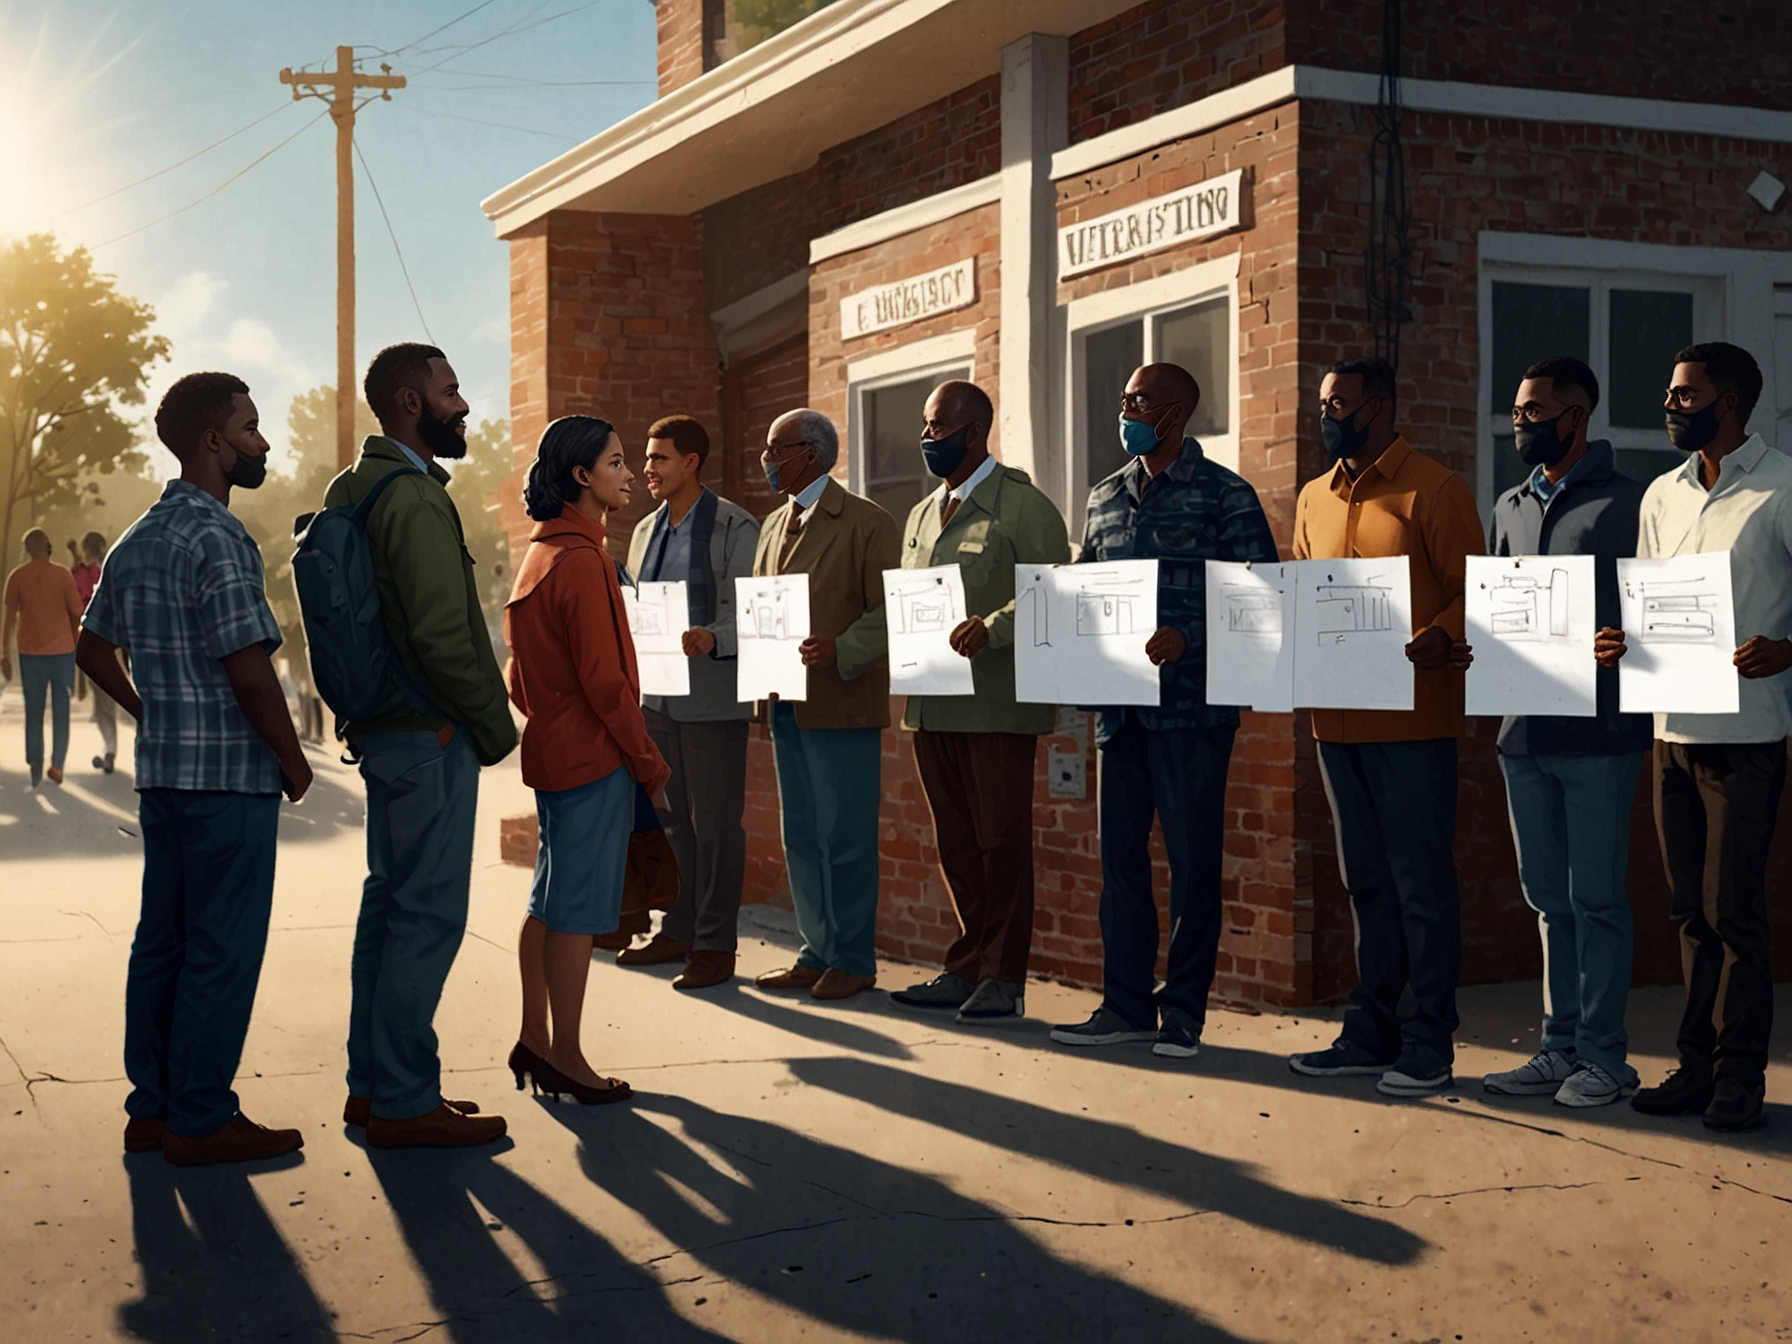 Voters lining up at polling stations early in the morning, presenting identification to poll workers to verify their eligibility before casting their votes.